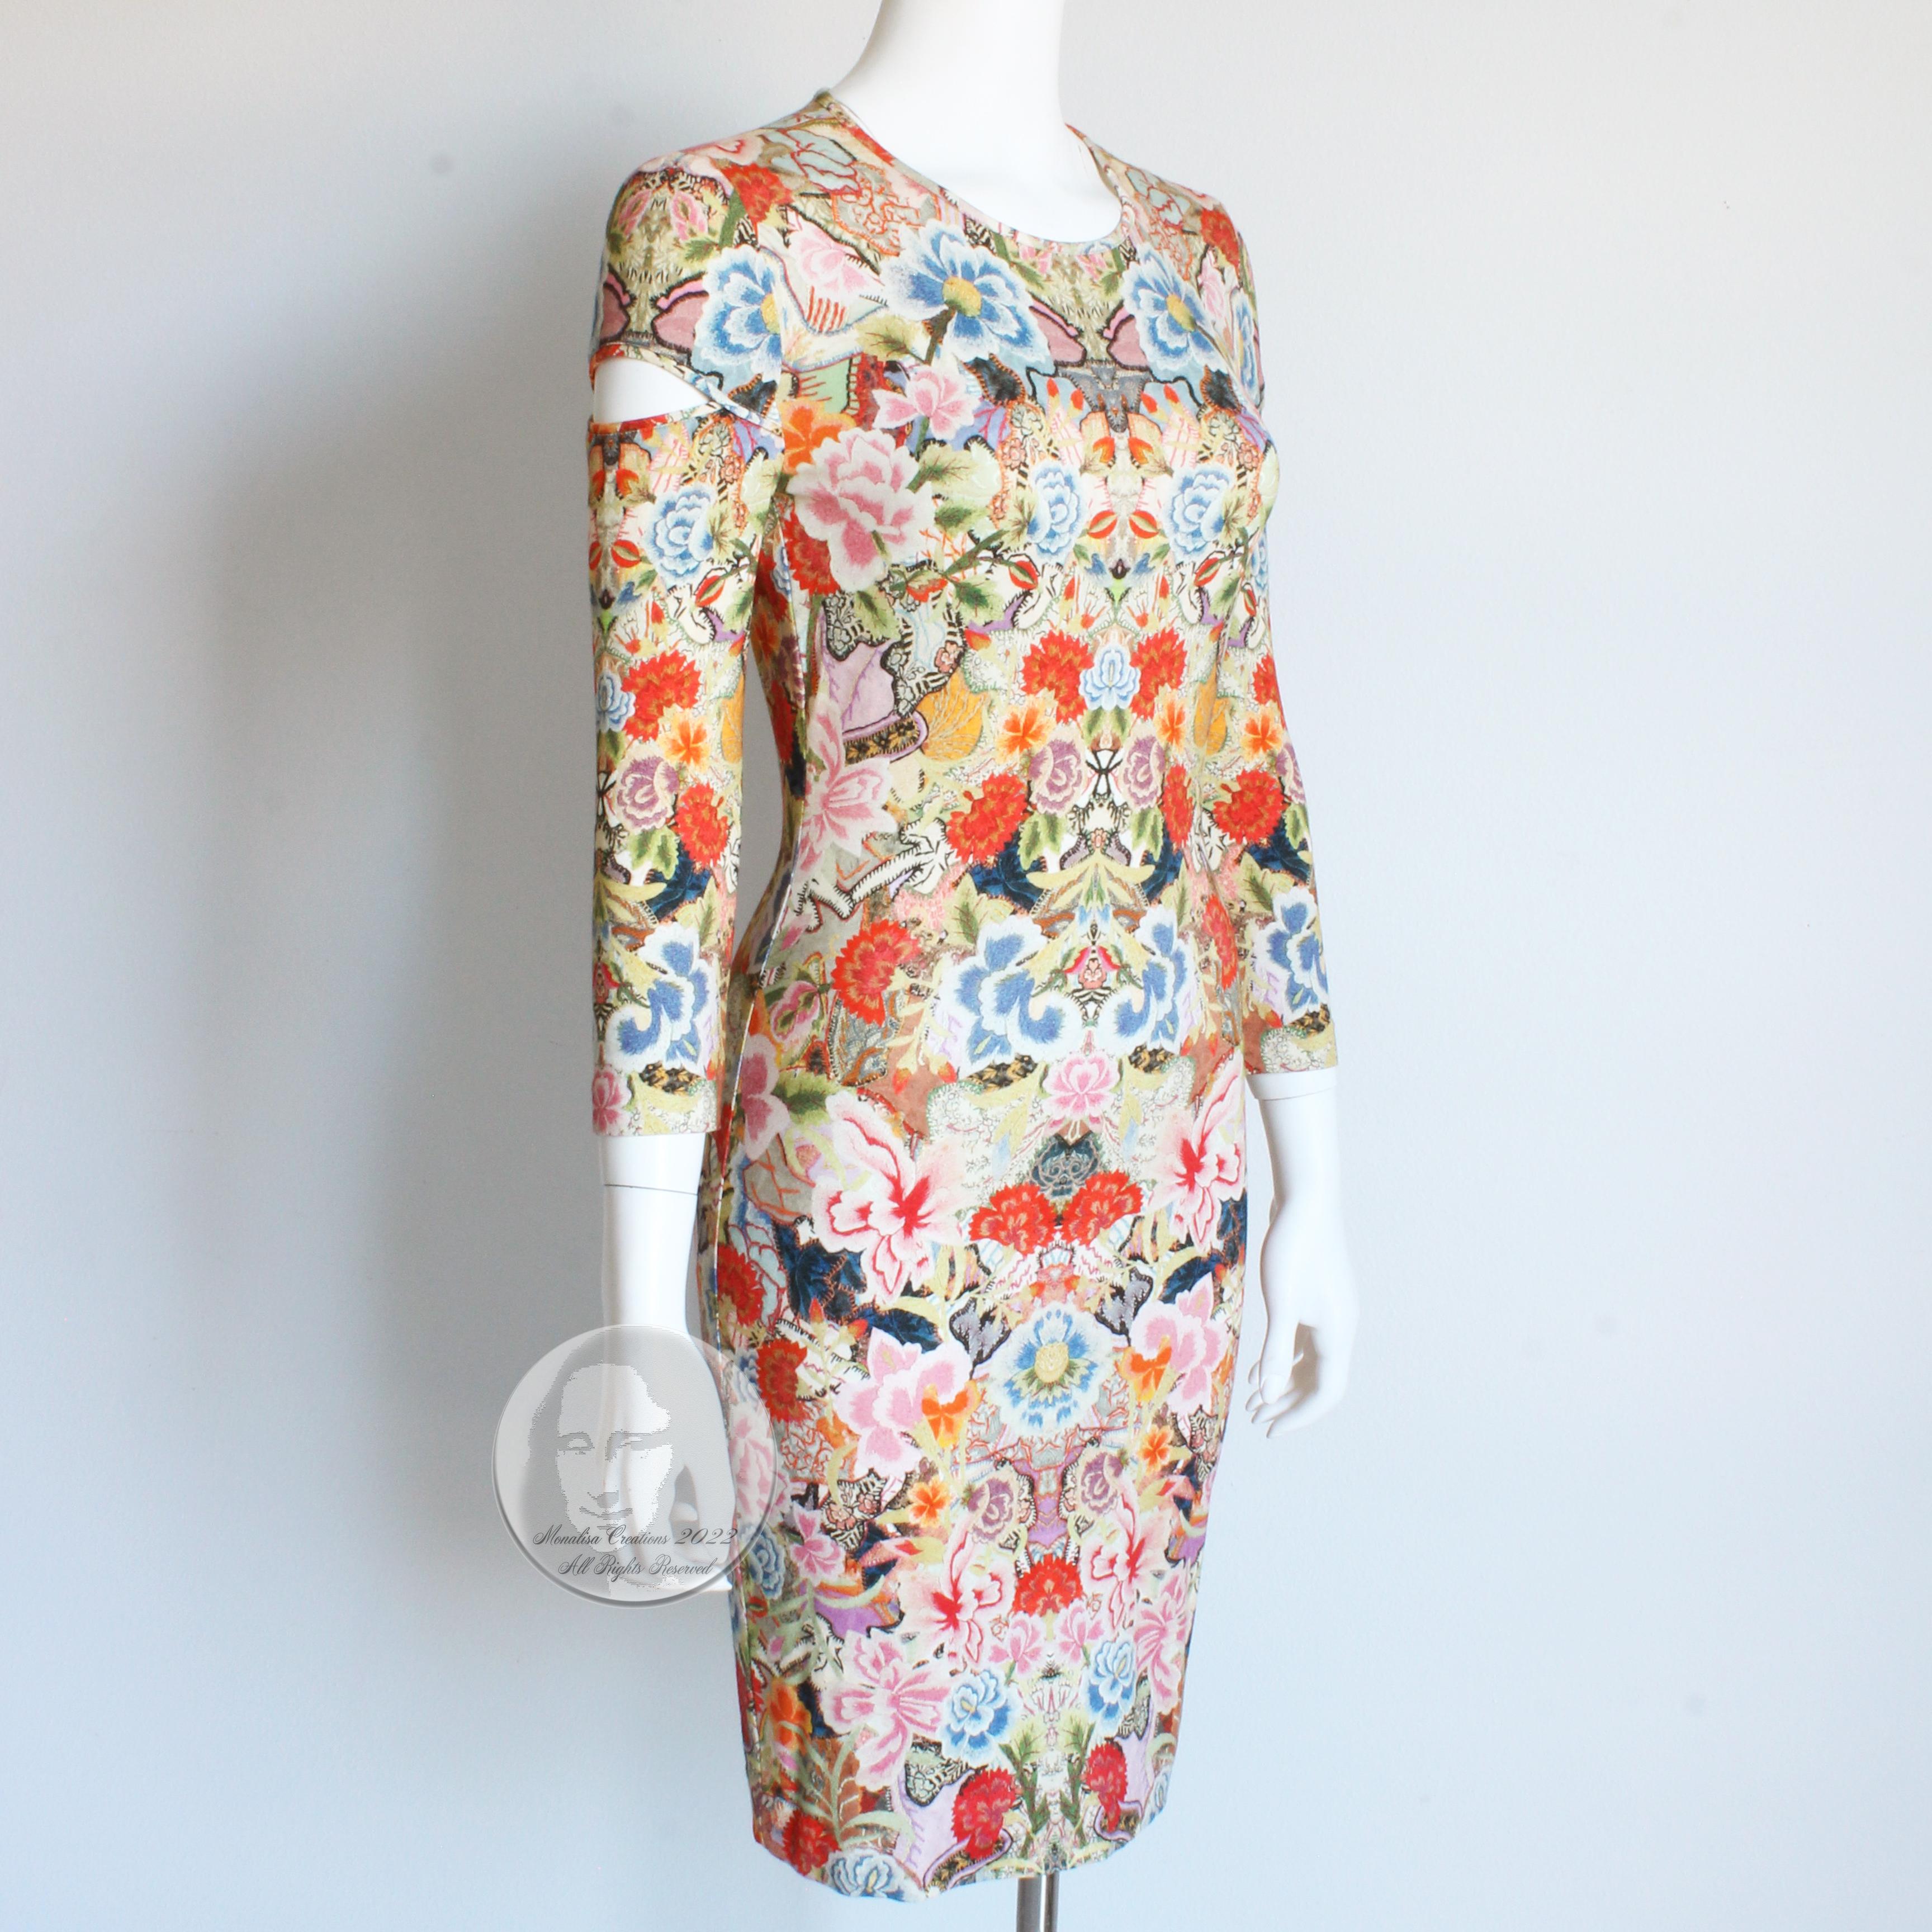 Alexander McQueen Slash Sleeve Dress Kaleidoscope Floral Print Abstract Bodycon  In Good Condition For Sale In Port Saint Lucie, FL